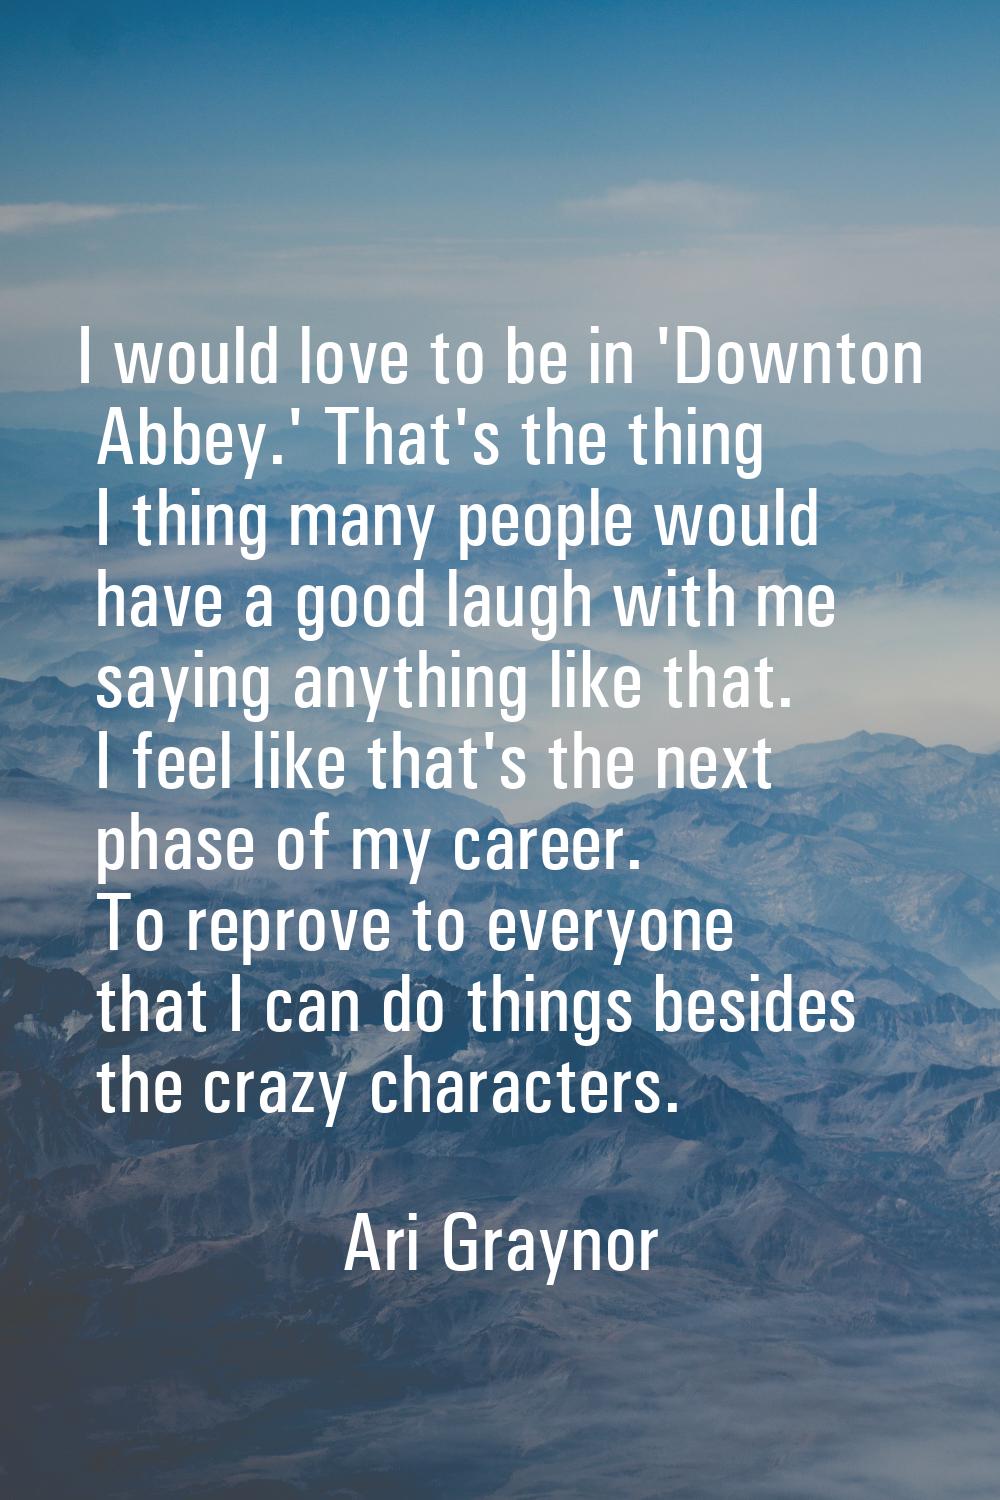 I would love to be in 'Downton Abbey.' That's the thing I thing many people would have a good laugh